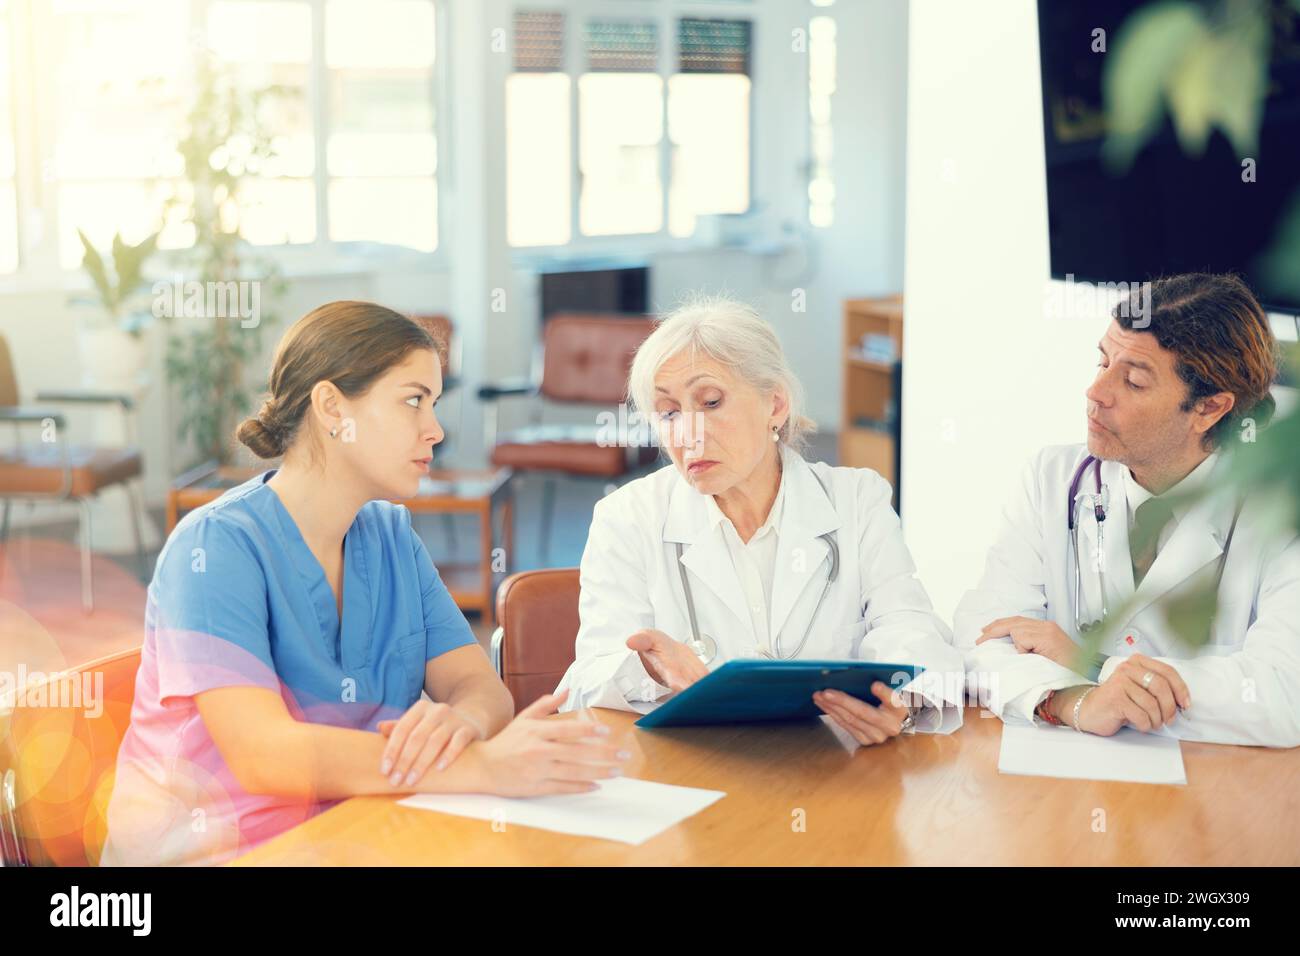 Senior female head doctor conducting medical council with colleagues Stock Photo